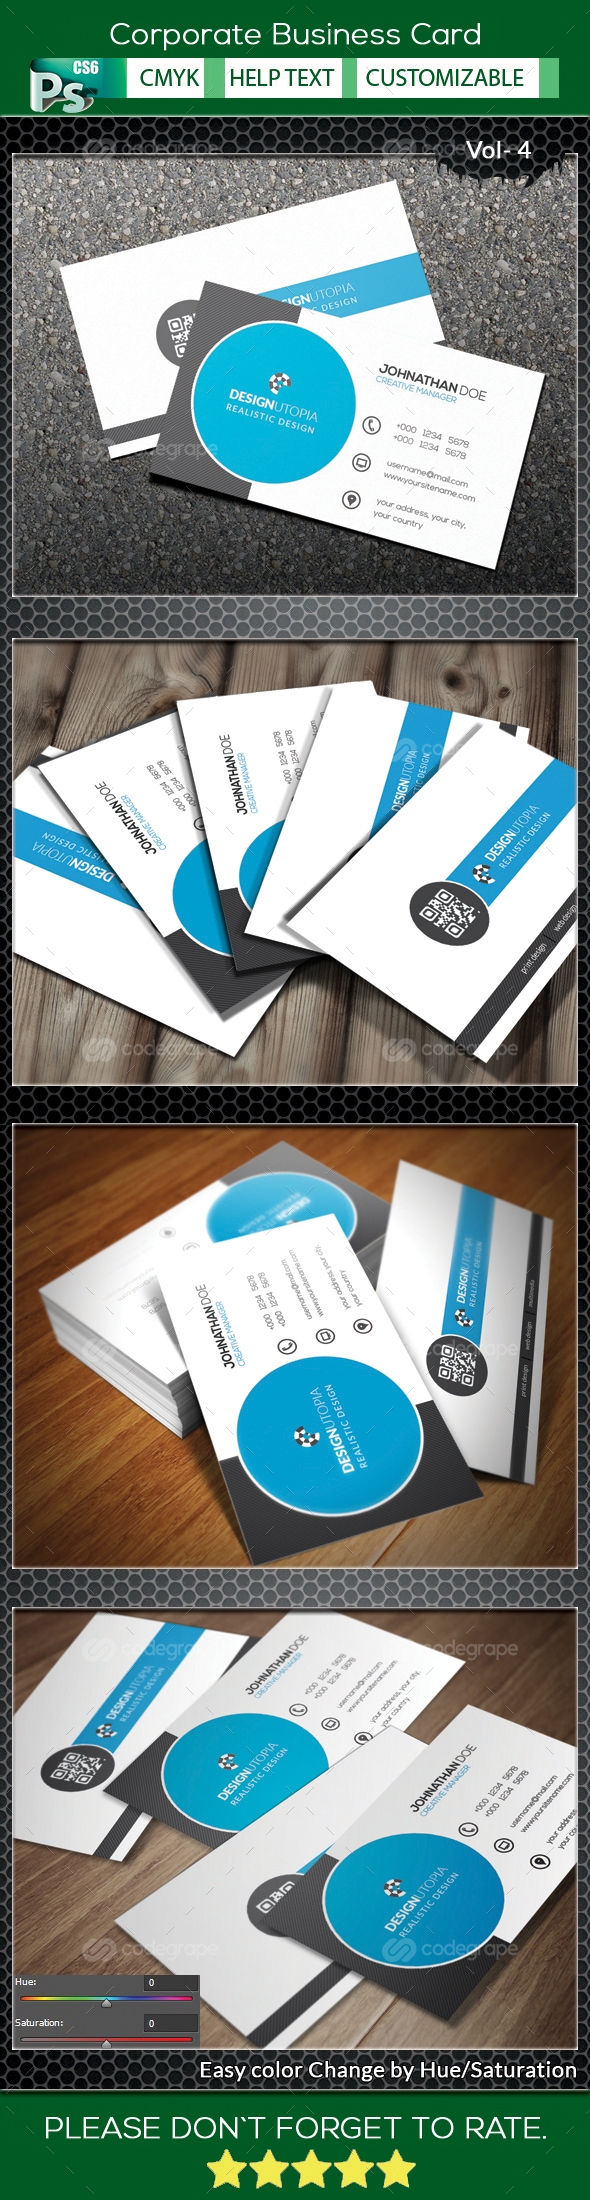 Corporate Business Card V.4